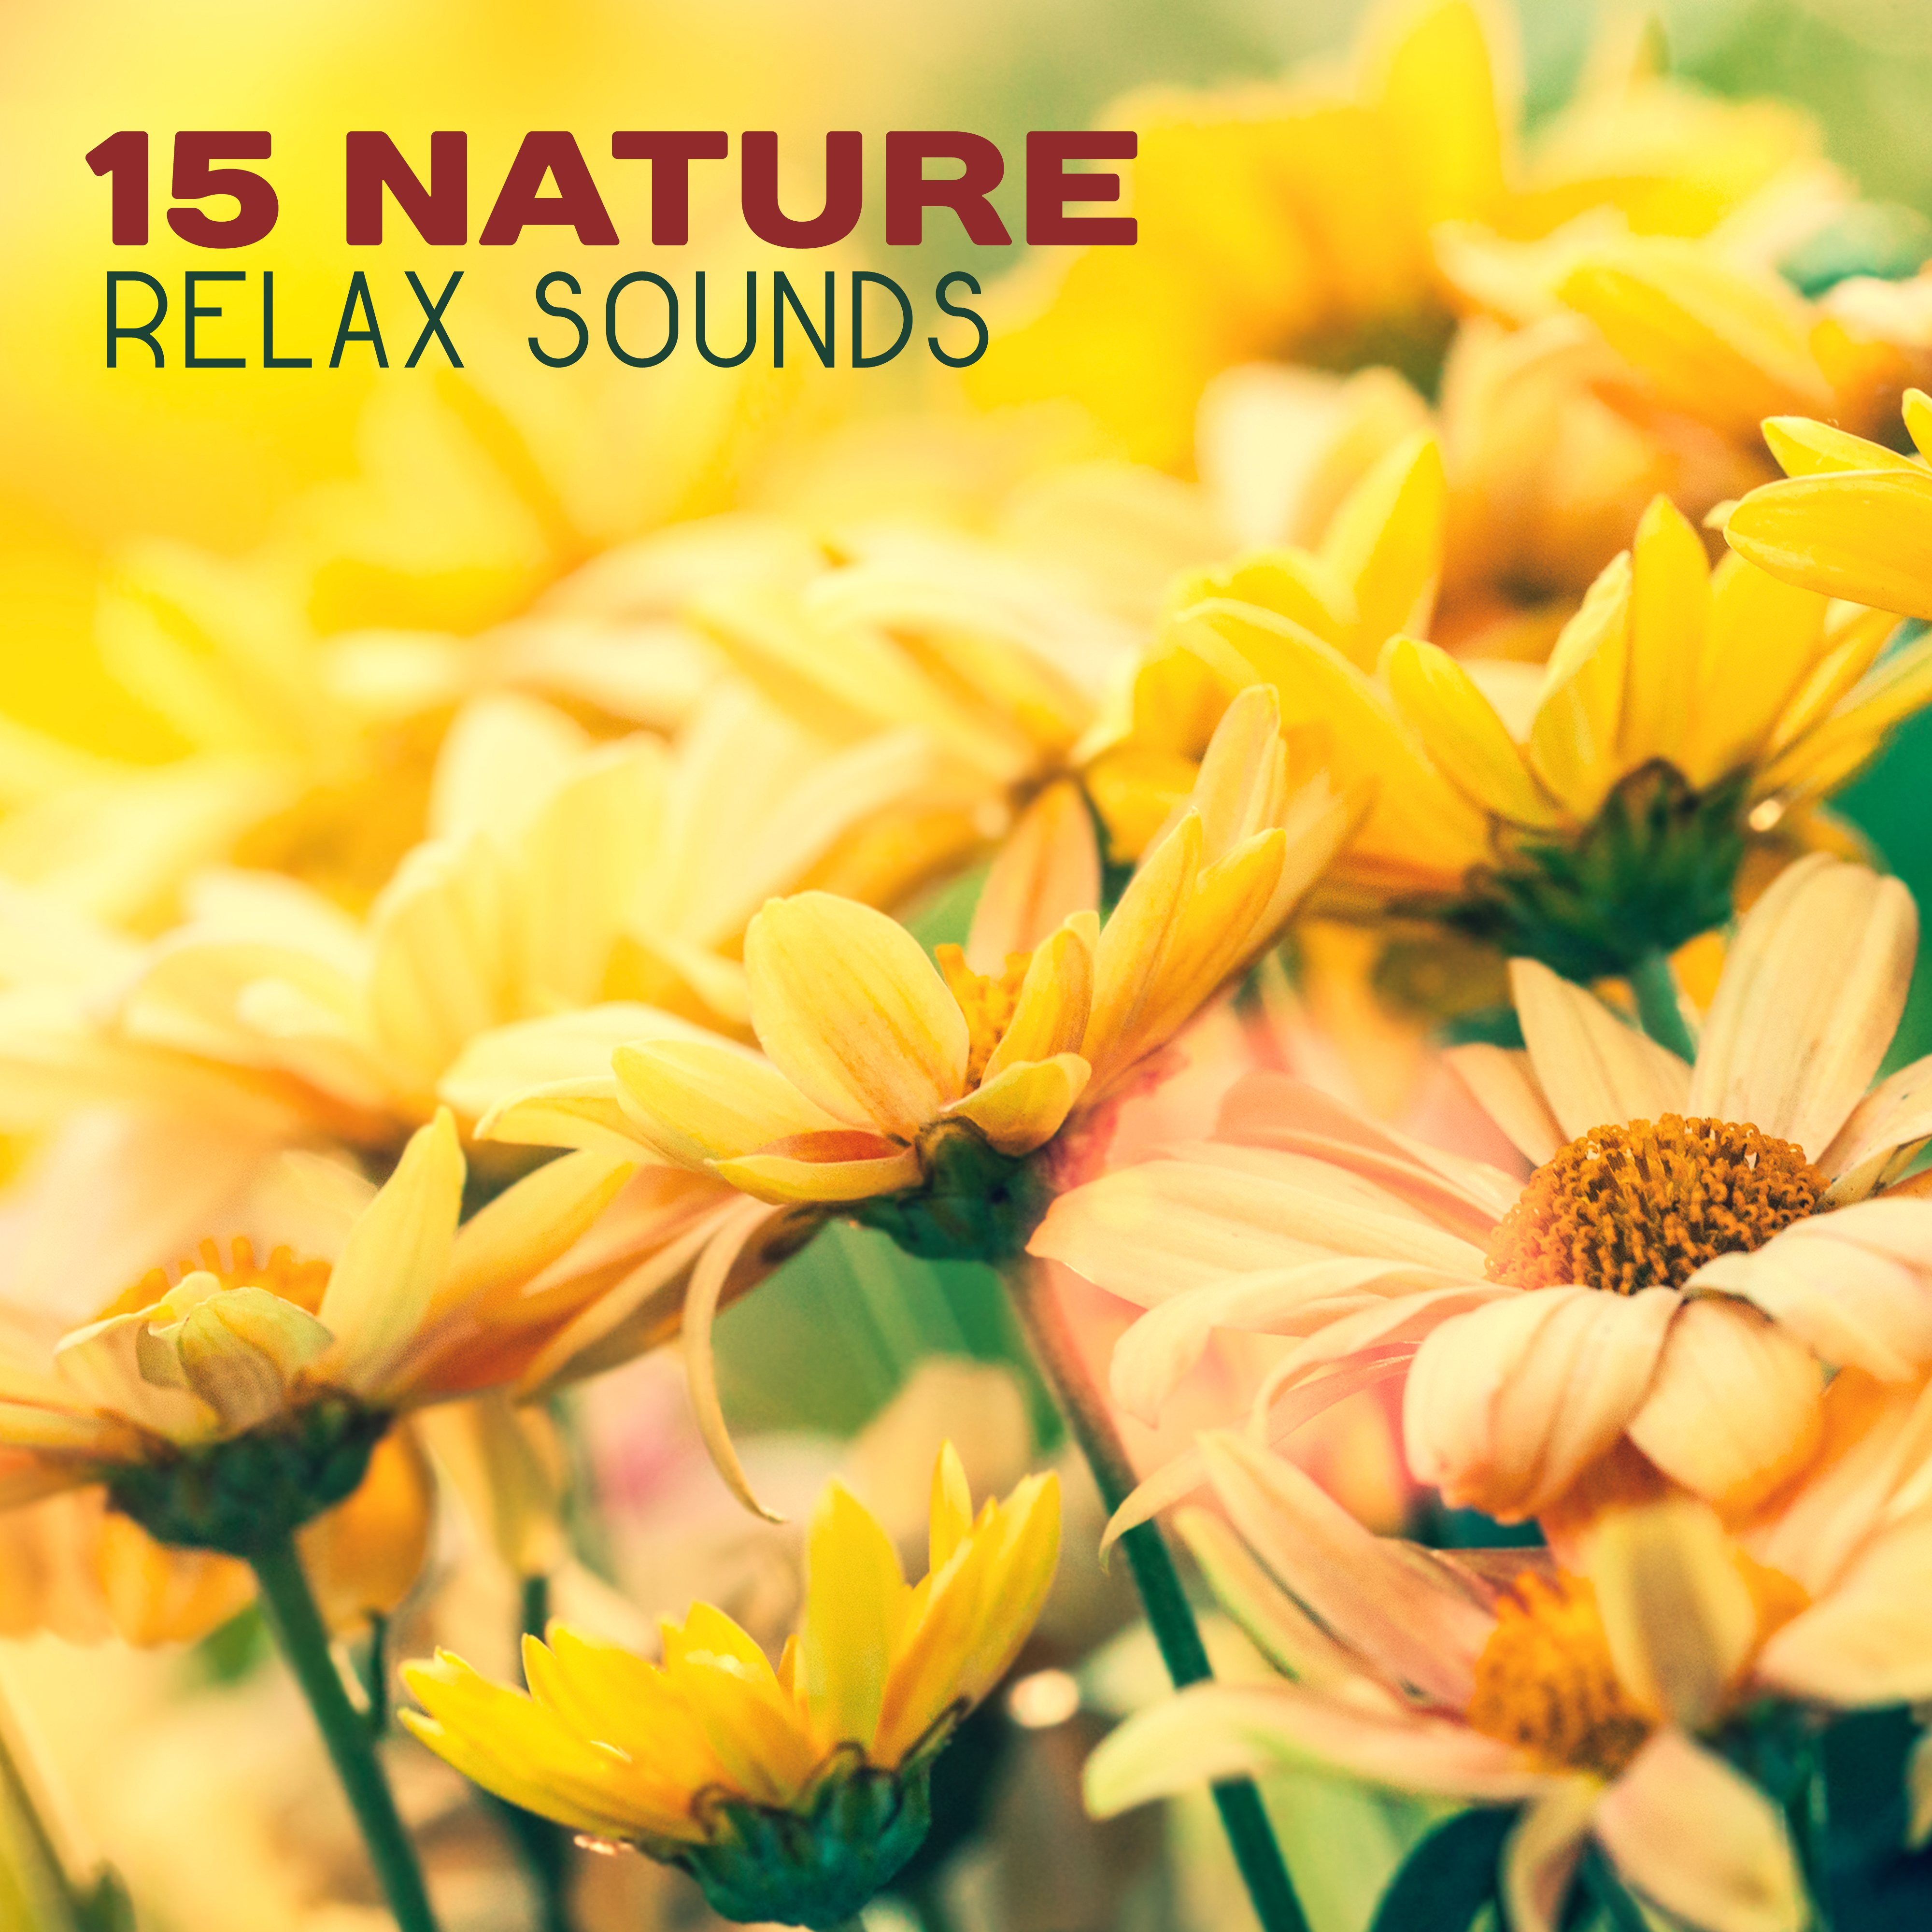 15 Nature Relax Sounds